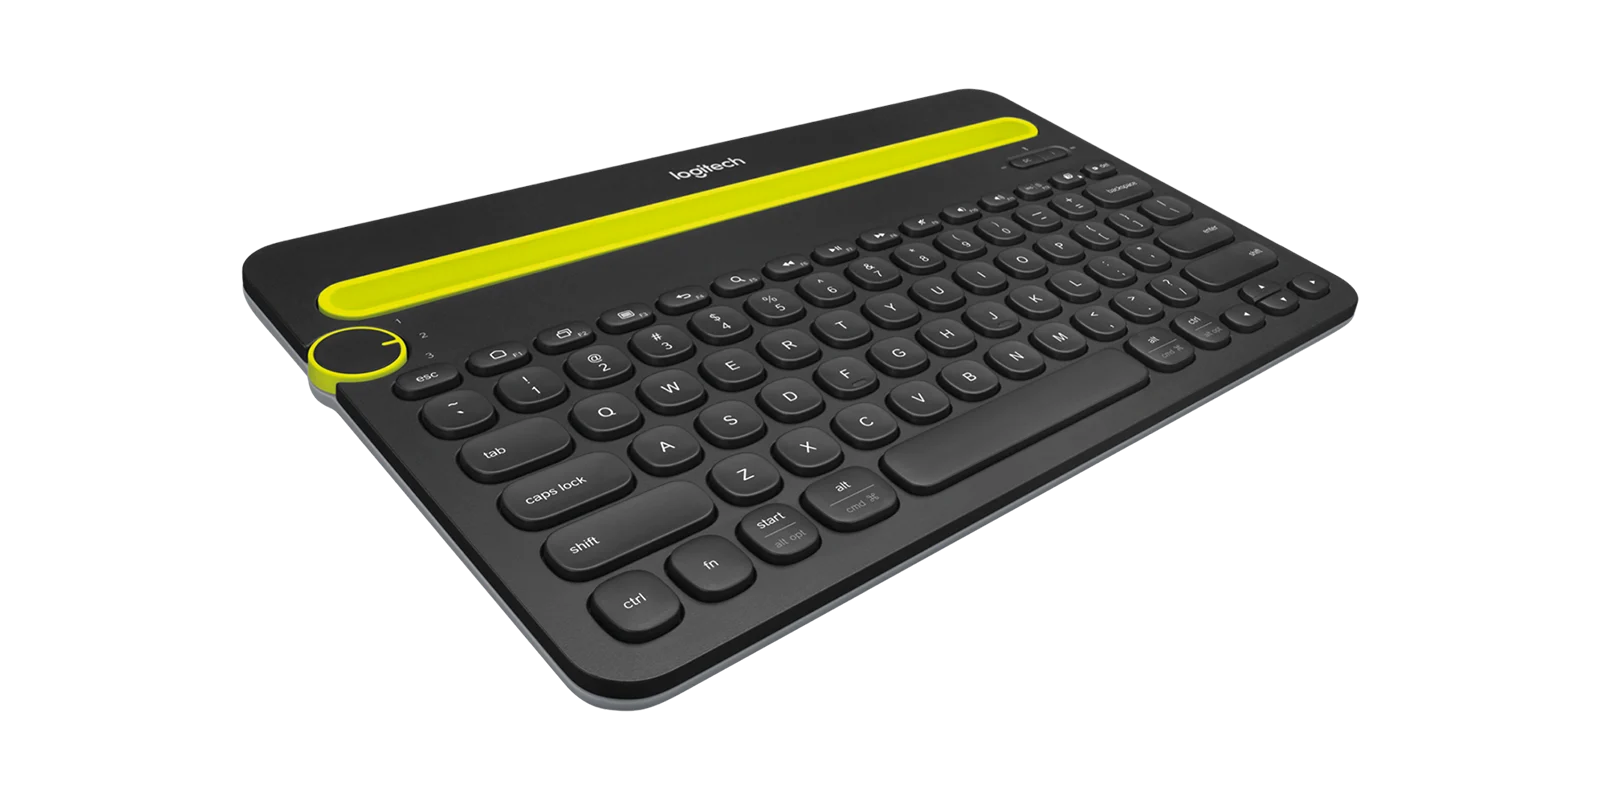 Logitech K480 Wireless Multi-Device Keyboard for Windows, macOS, iPadOS, Android or Chrome OS, Bluetooth, Compact, Compatible with PC, Mac, Laptop, Smartphone, Tablet